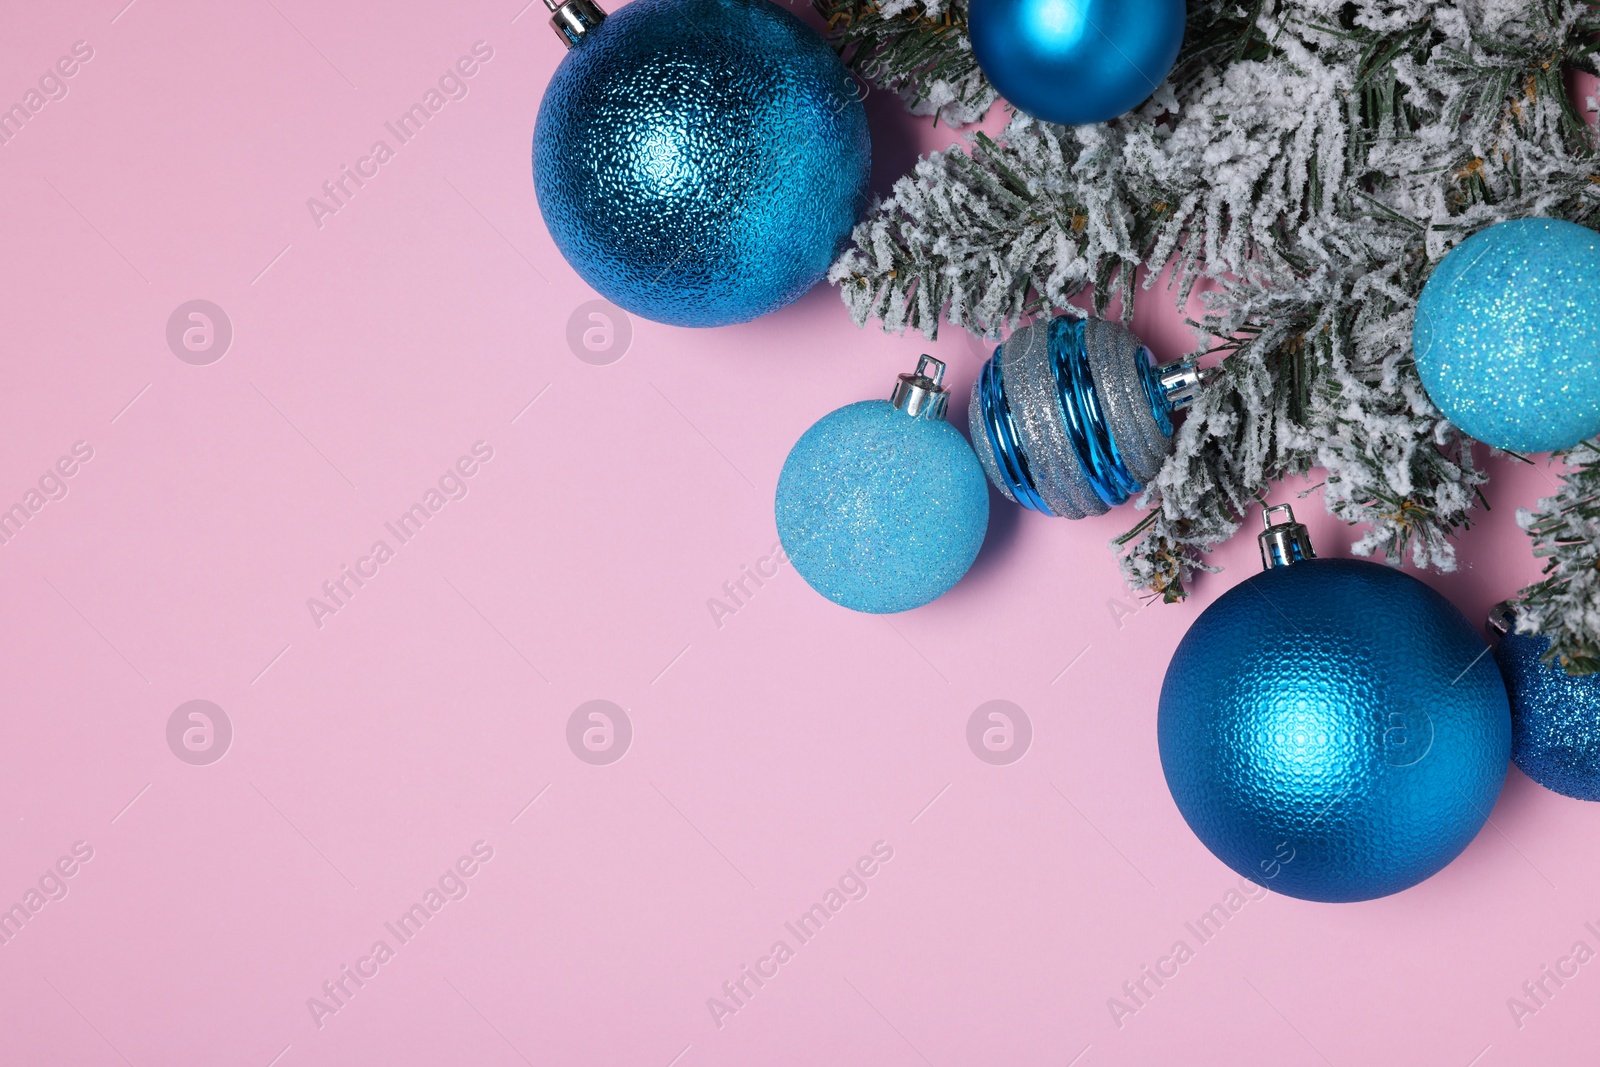 Photo of Shiny blue Christmas balls and fir tree branches with snow on pink background, flat lay. Space for text